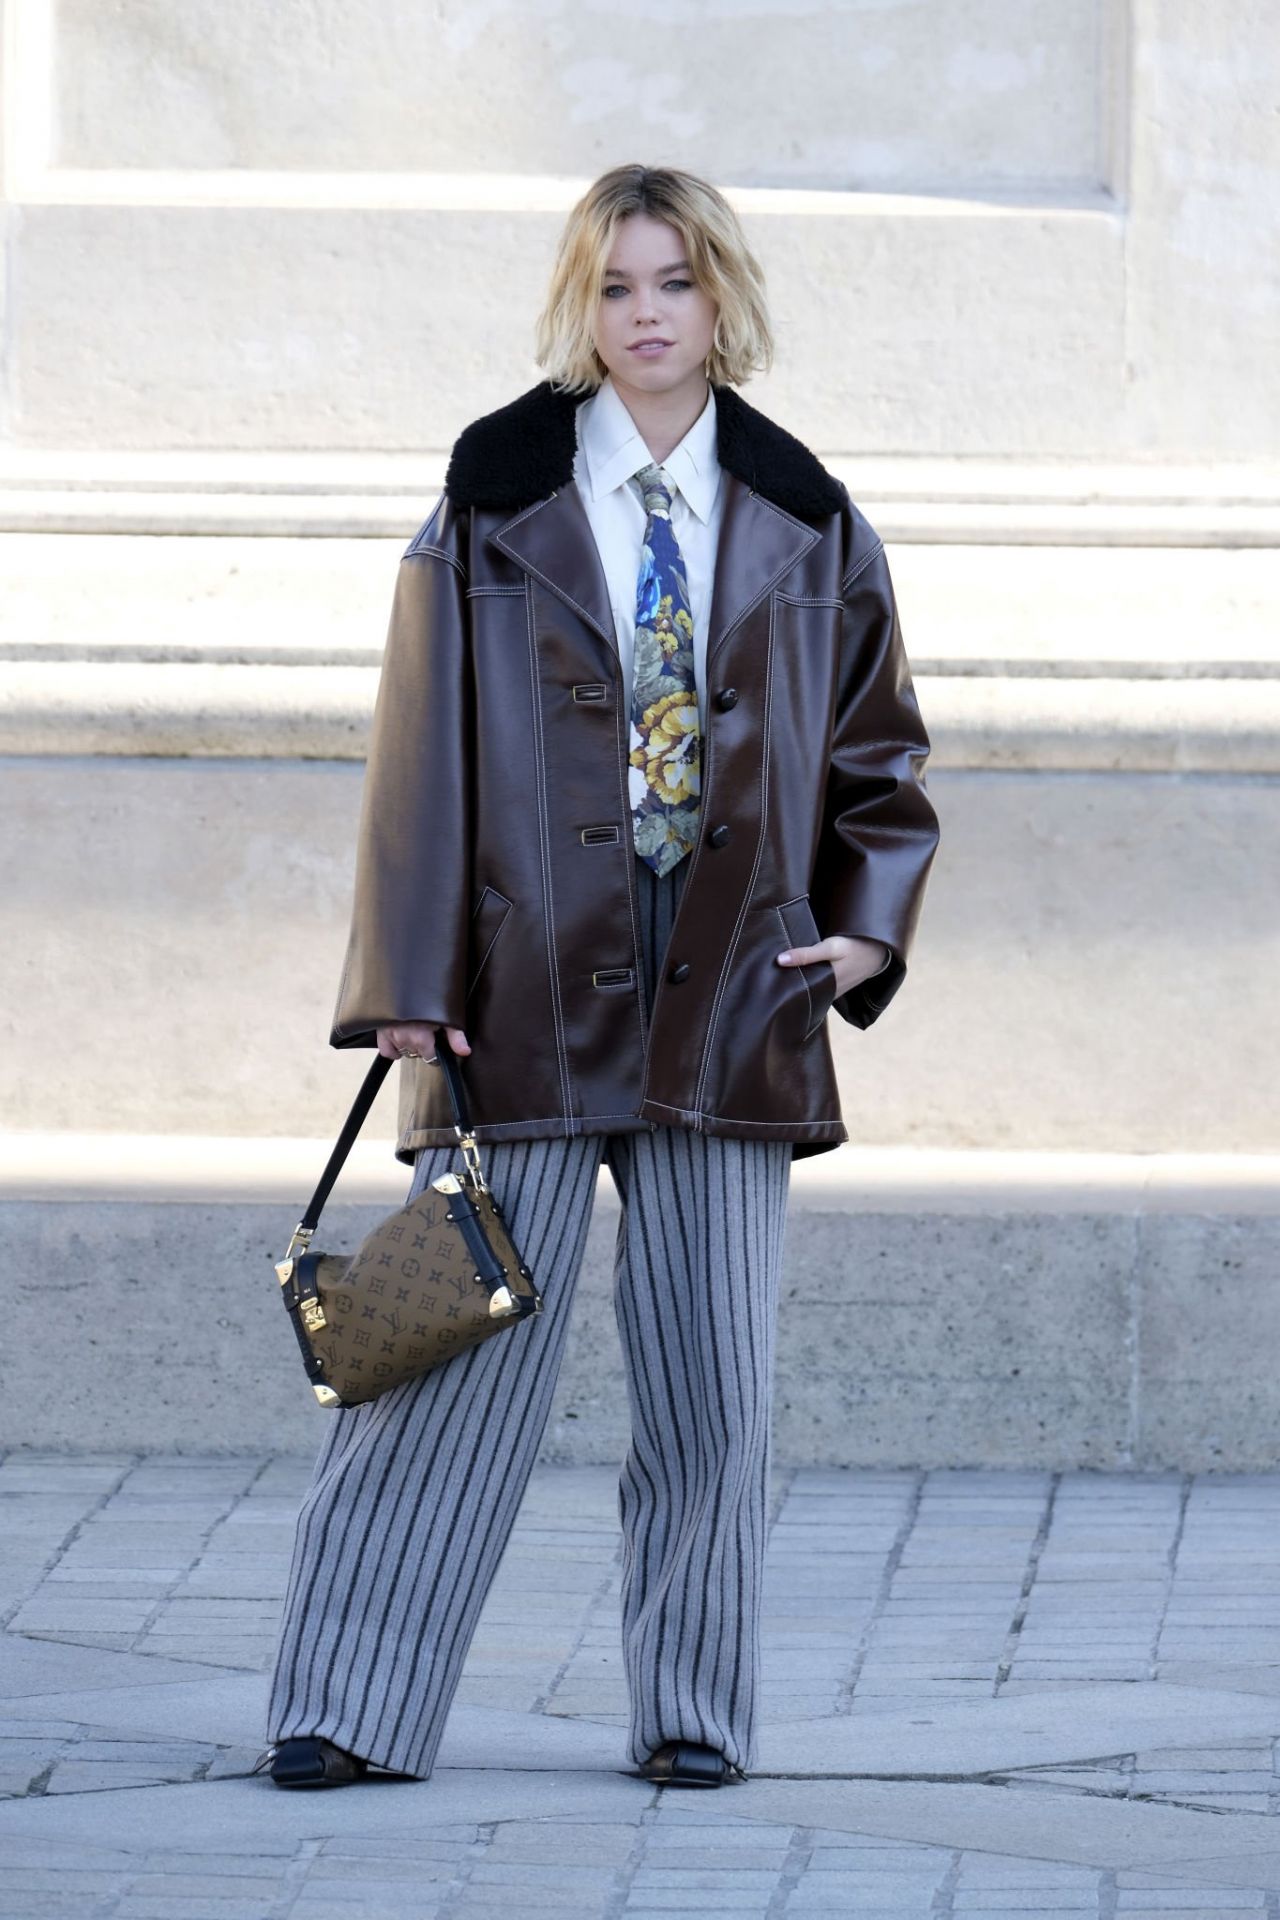 Milly Alcock Milly-alcock-louis-vuitton-show-in-paris-10-04-2022-8